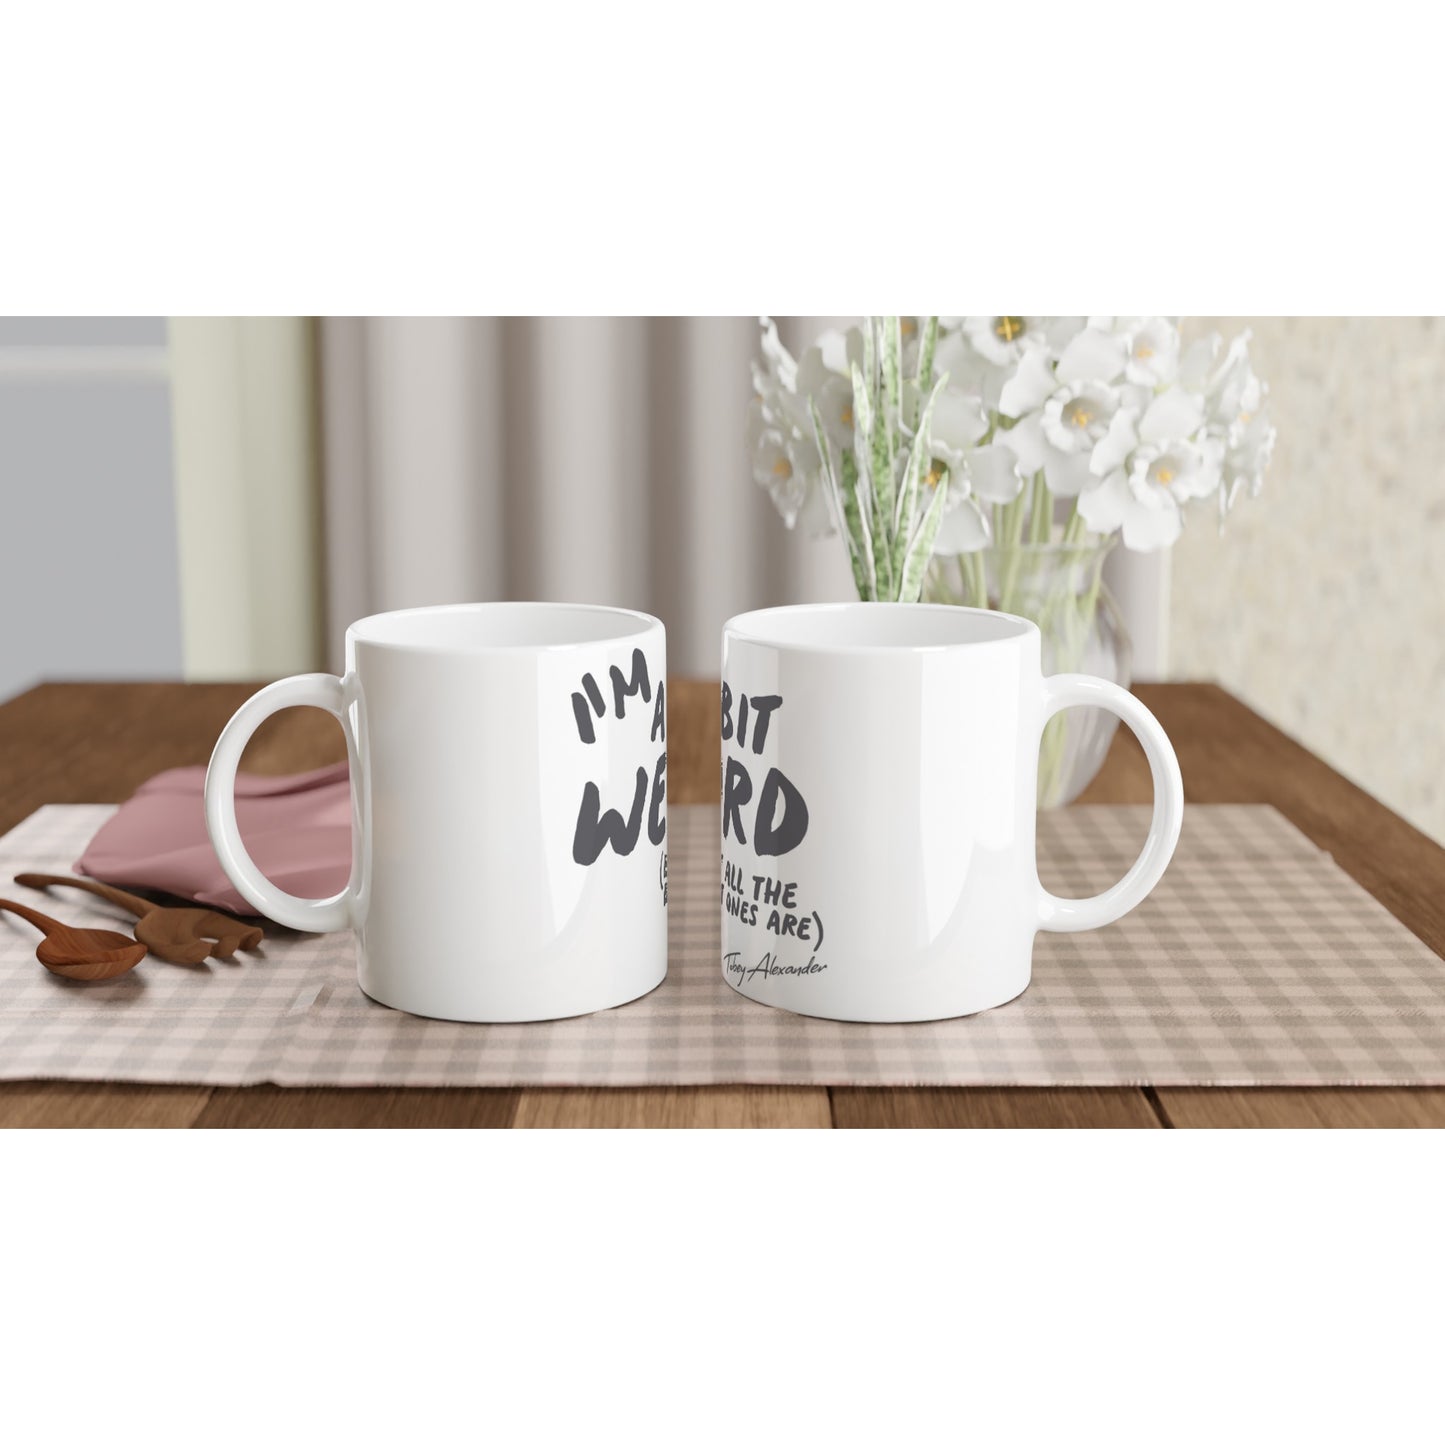 Be Proud, Be Weird! Embrace Your Quirkiness with our 11oz Ceramic Mug